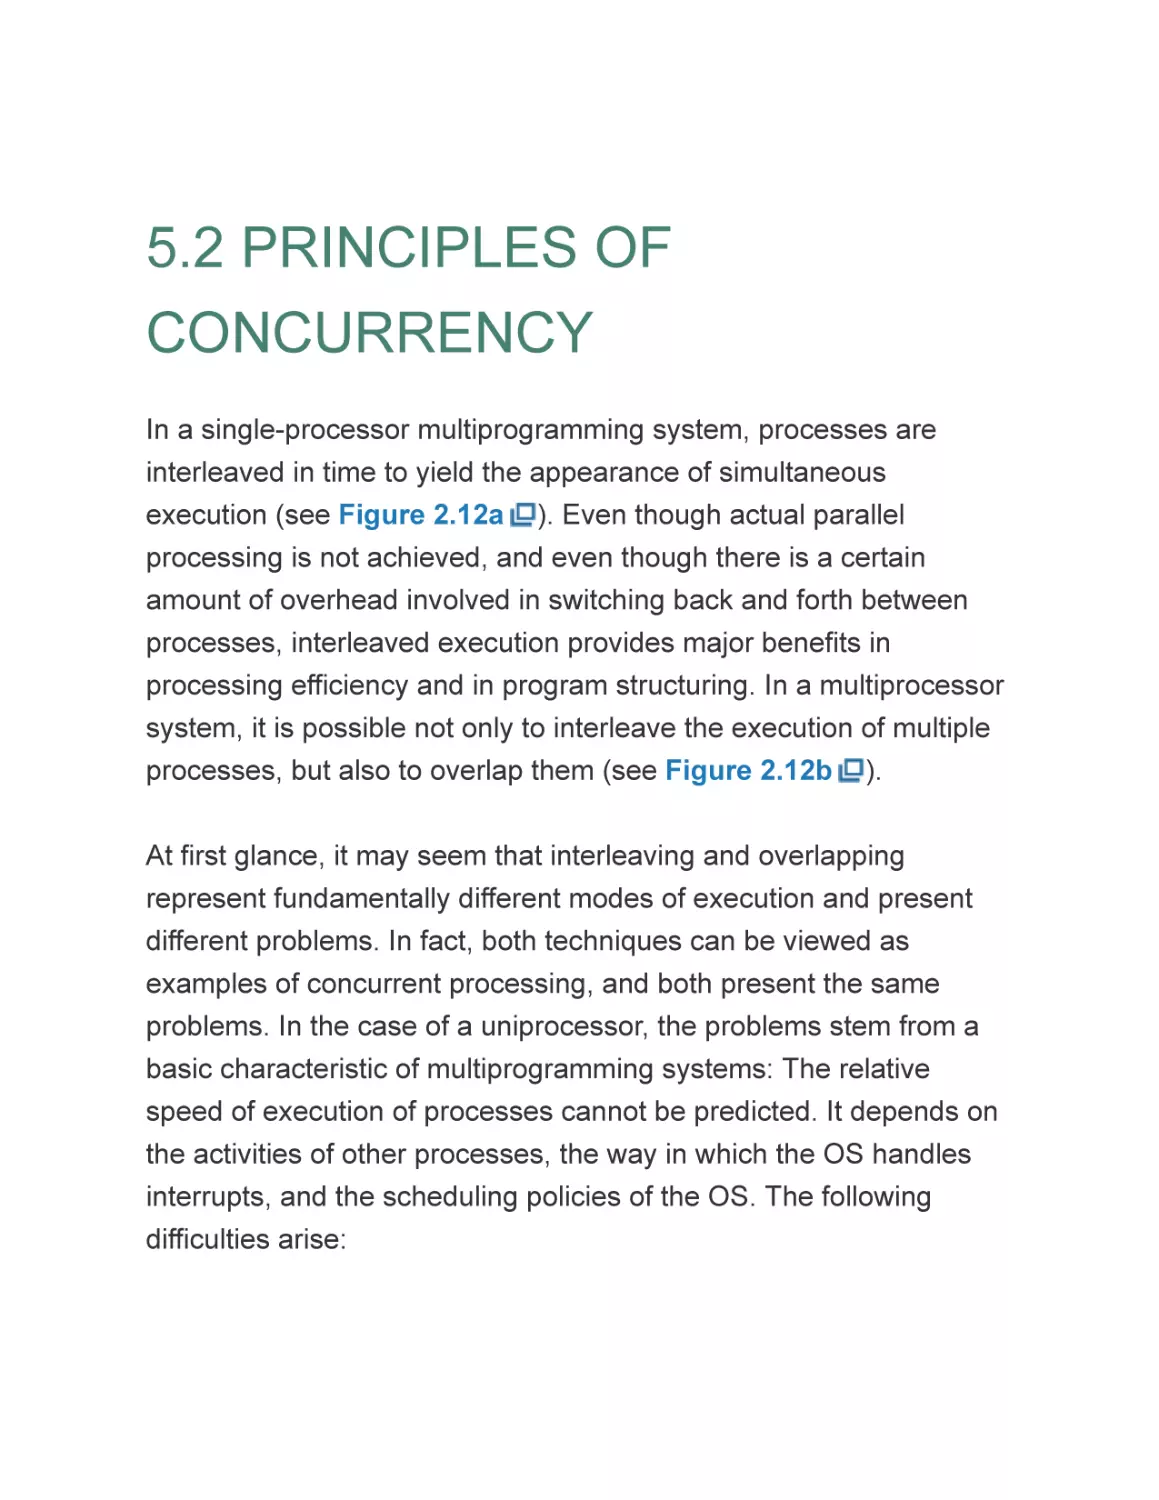 5.2 PRINCIPLES OF CONCURRENCY